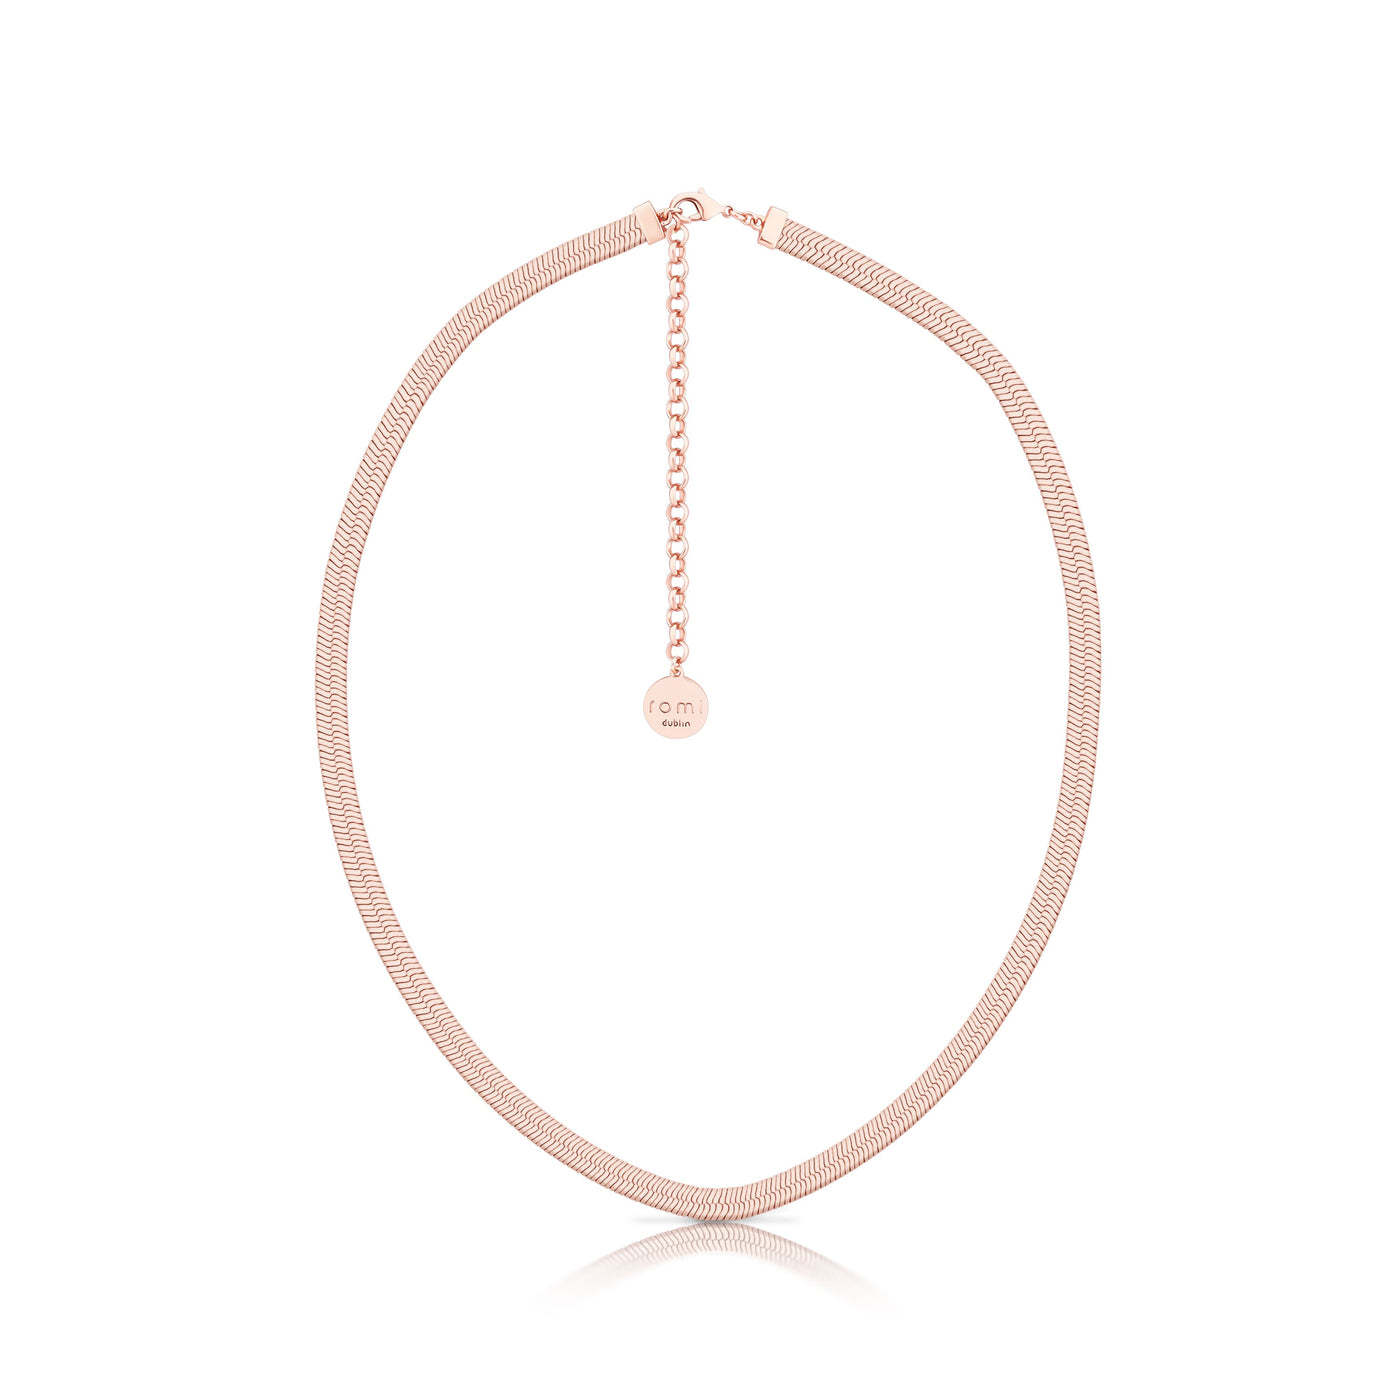 Romi Necklace - Herringbone Chain - Rose Gold/Silver Plated